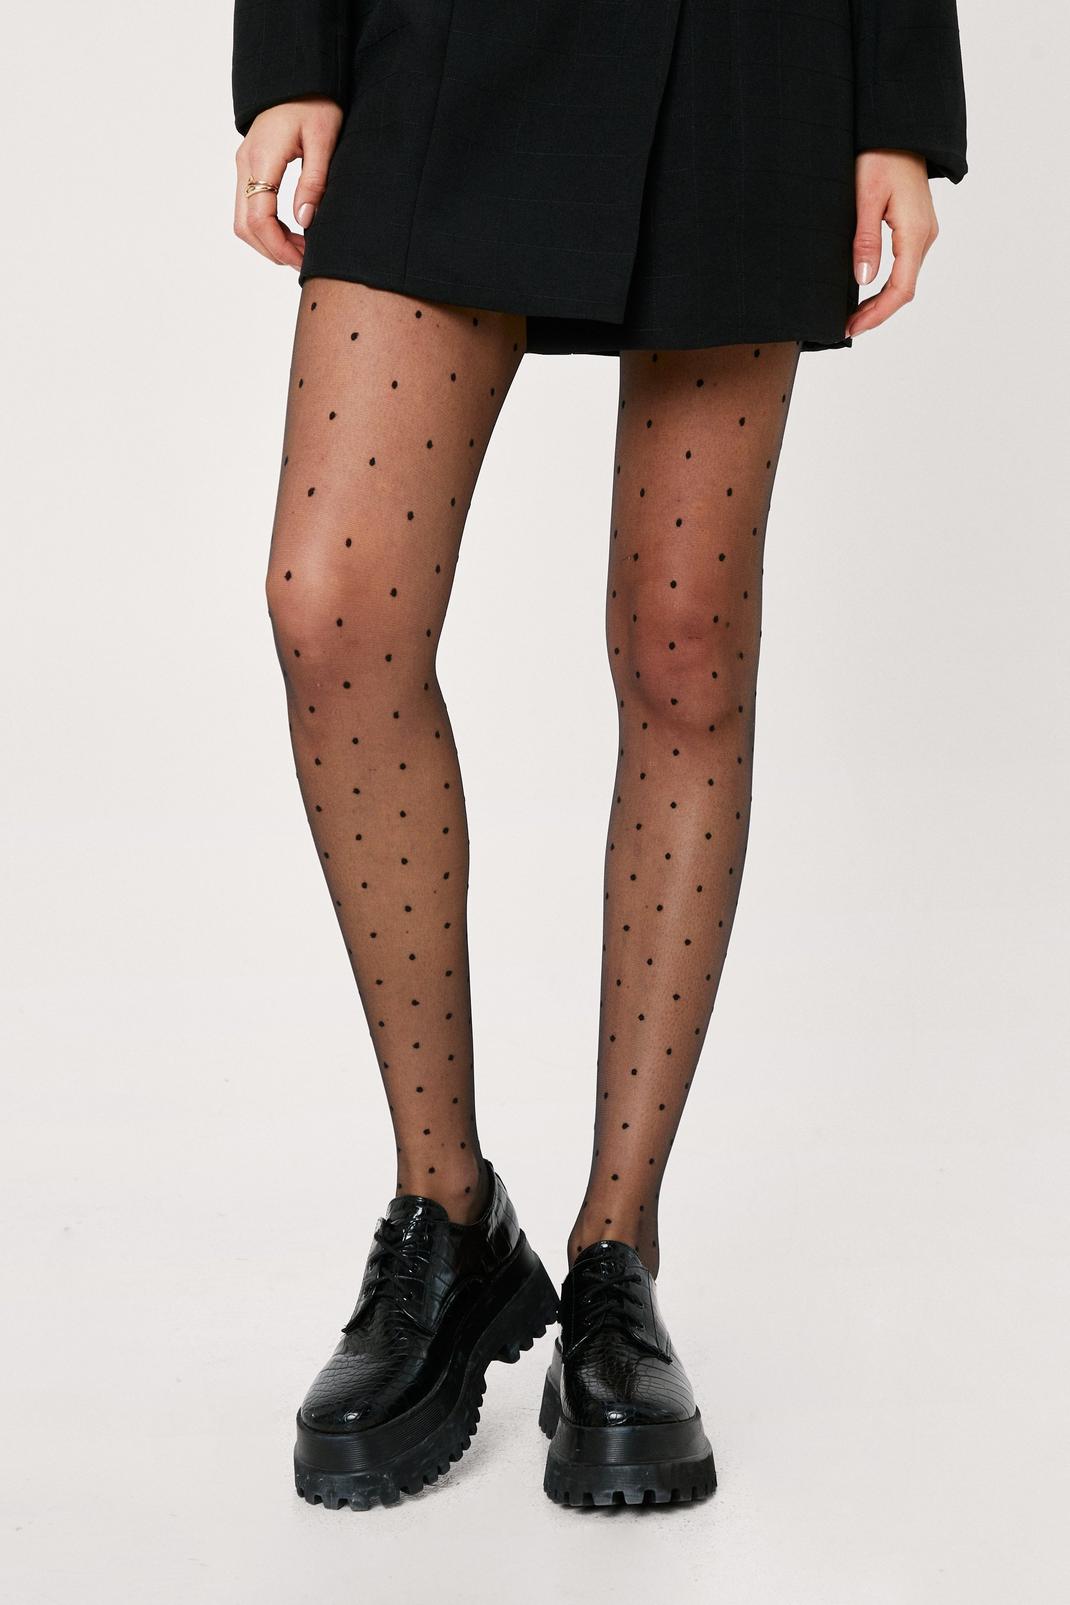 Scallop Stripe Patterned Tights